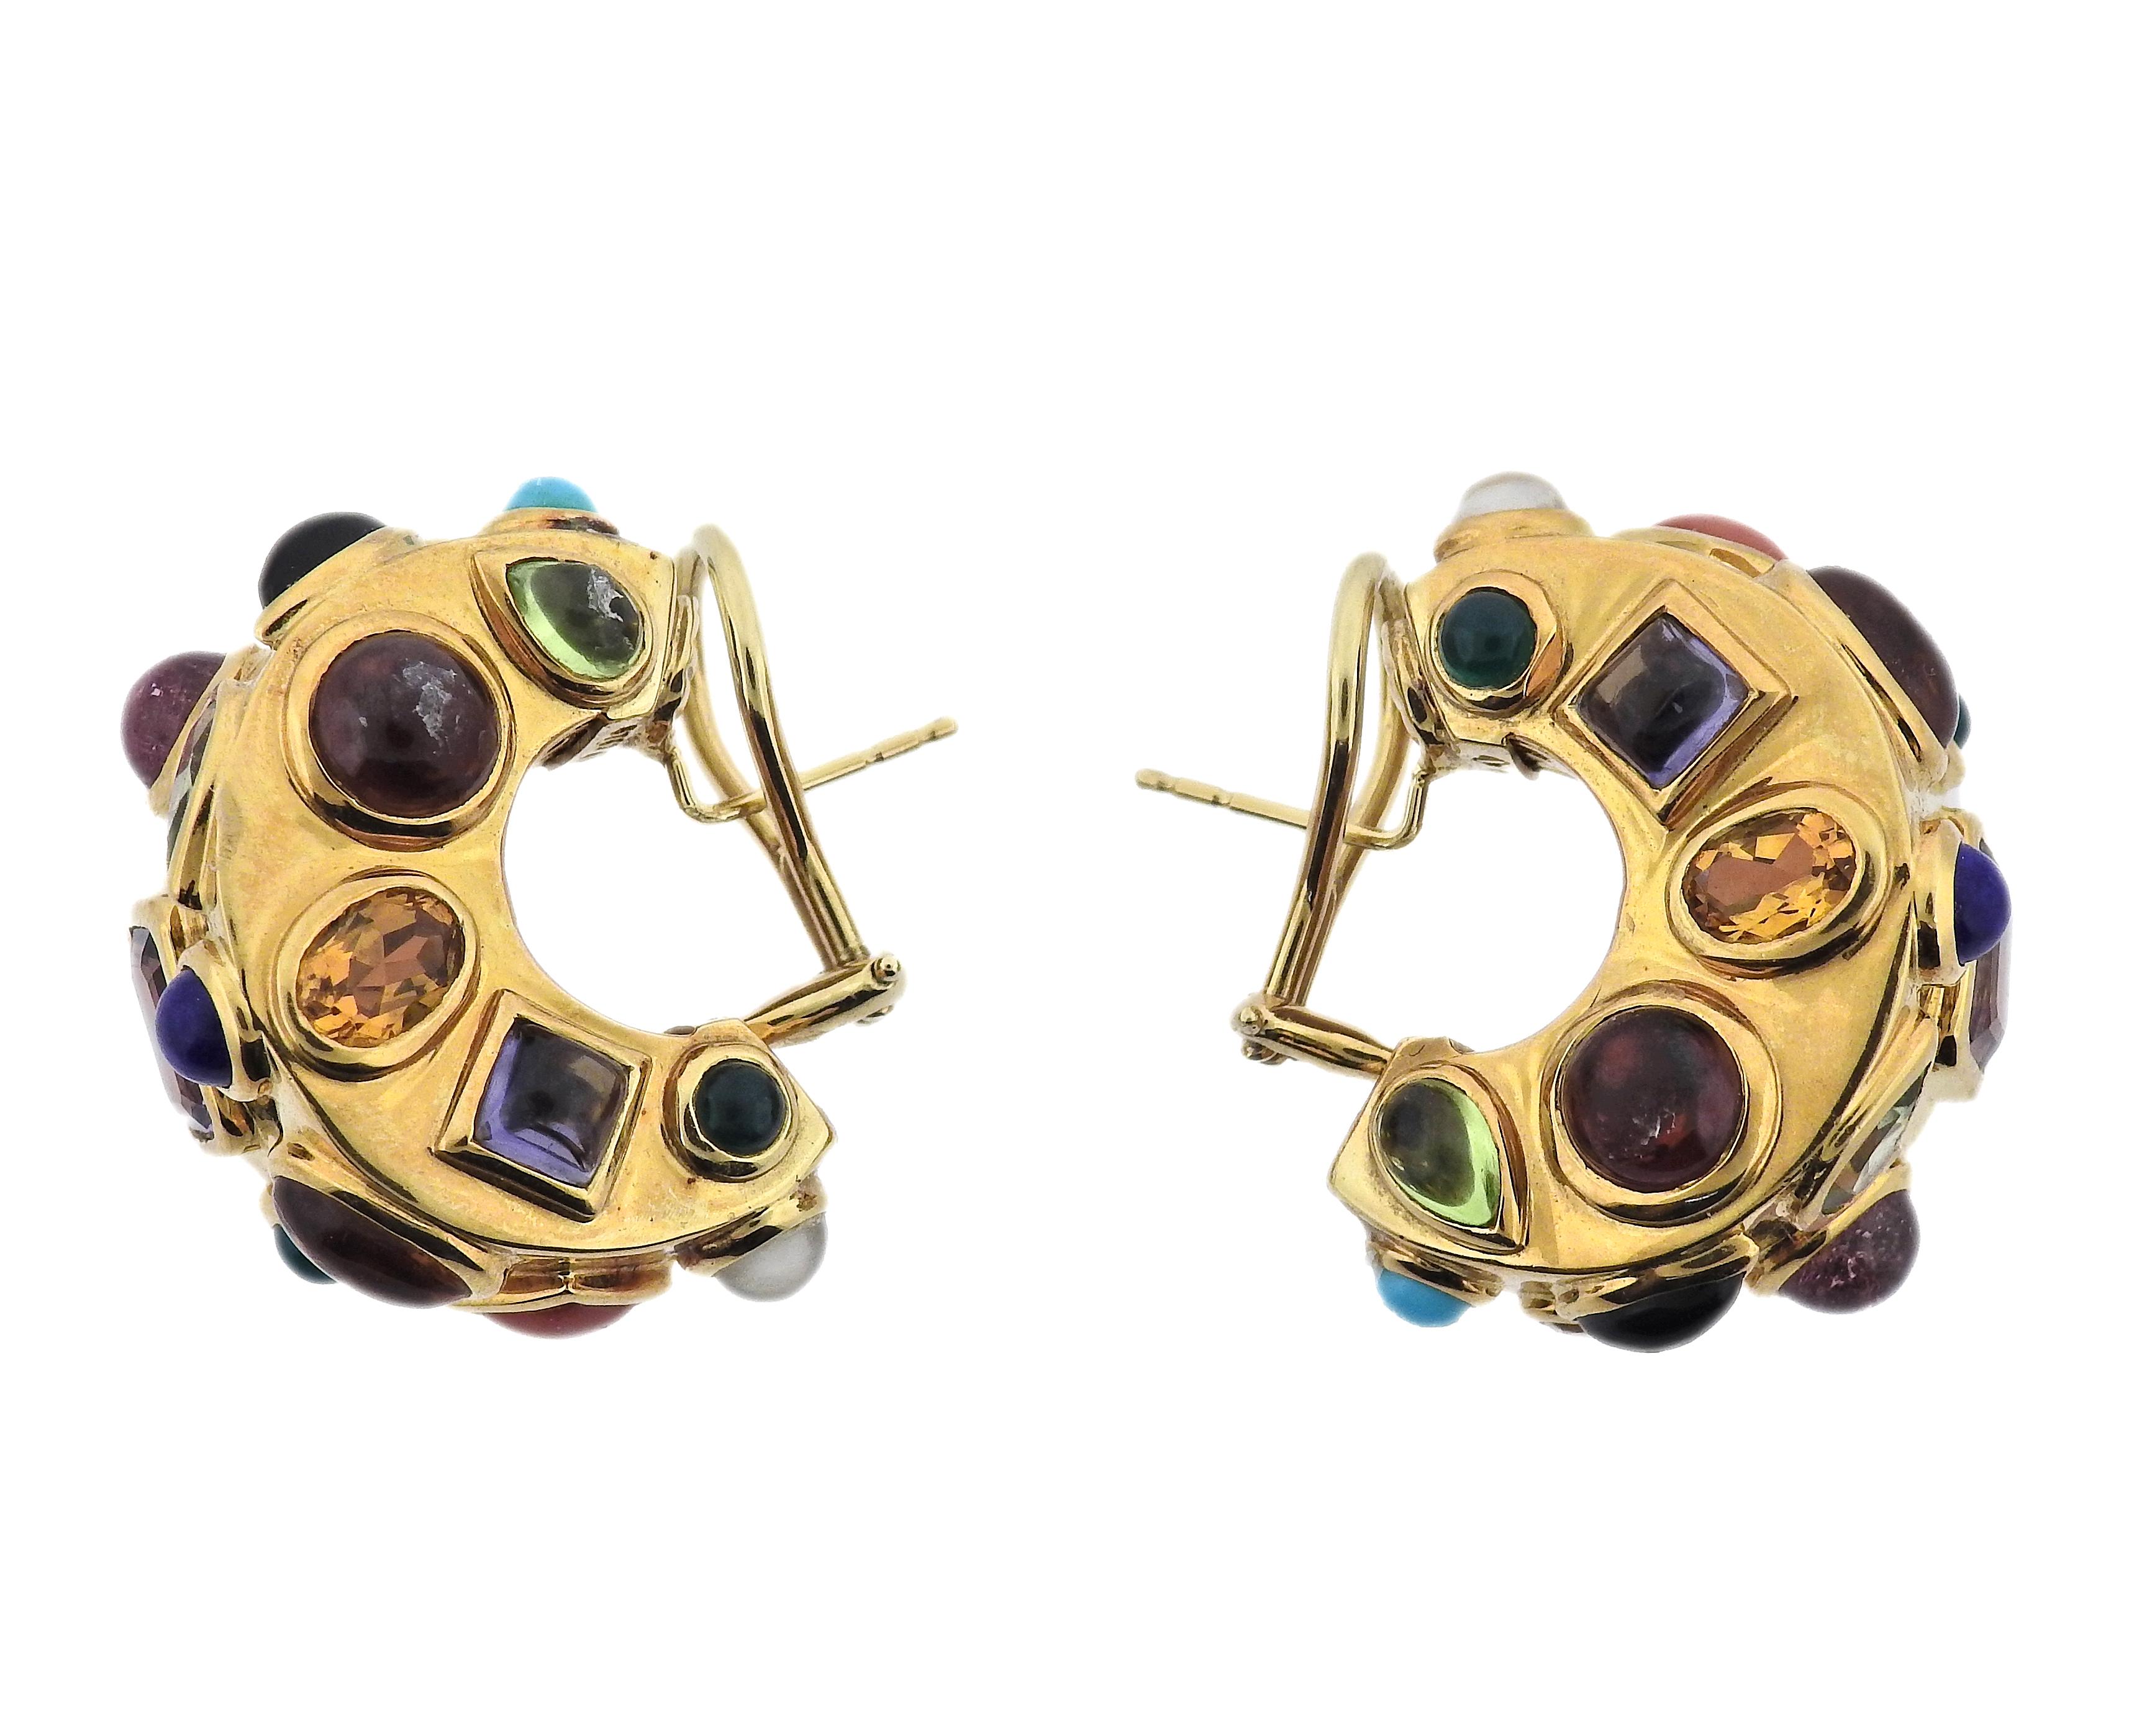 Pair of 18k gold Seaman Schepps Fifties earrings, with multi color gemstones, including Tourmaline, turquoise, garnet, lapis,  chrysoprase, iolite, amethyst, coral . Retail $12900. Earrings are 26mm x 16mm. Marked: Shell hallmark, 21267, 750. Weight